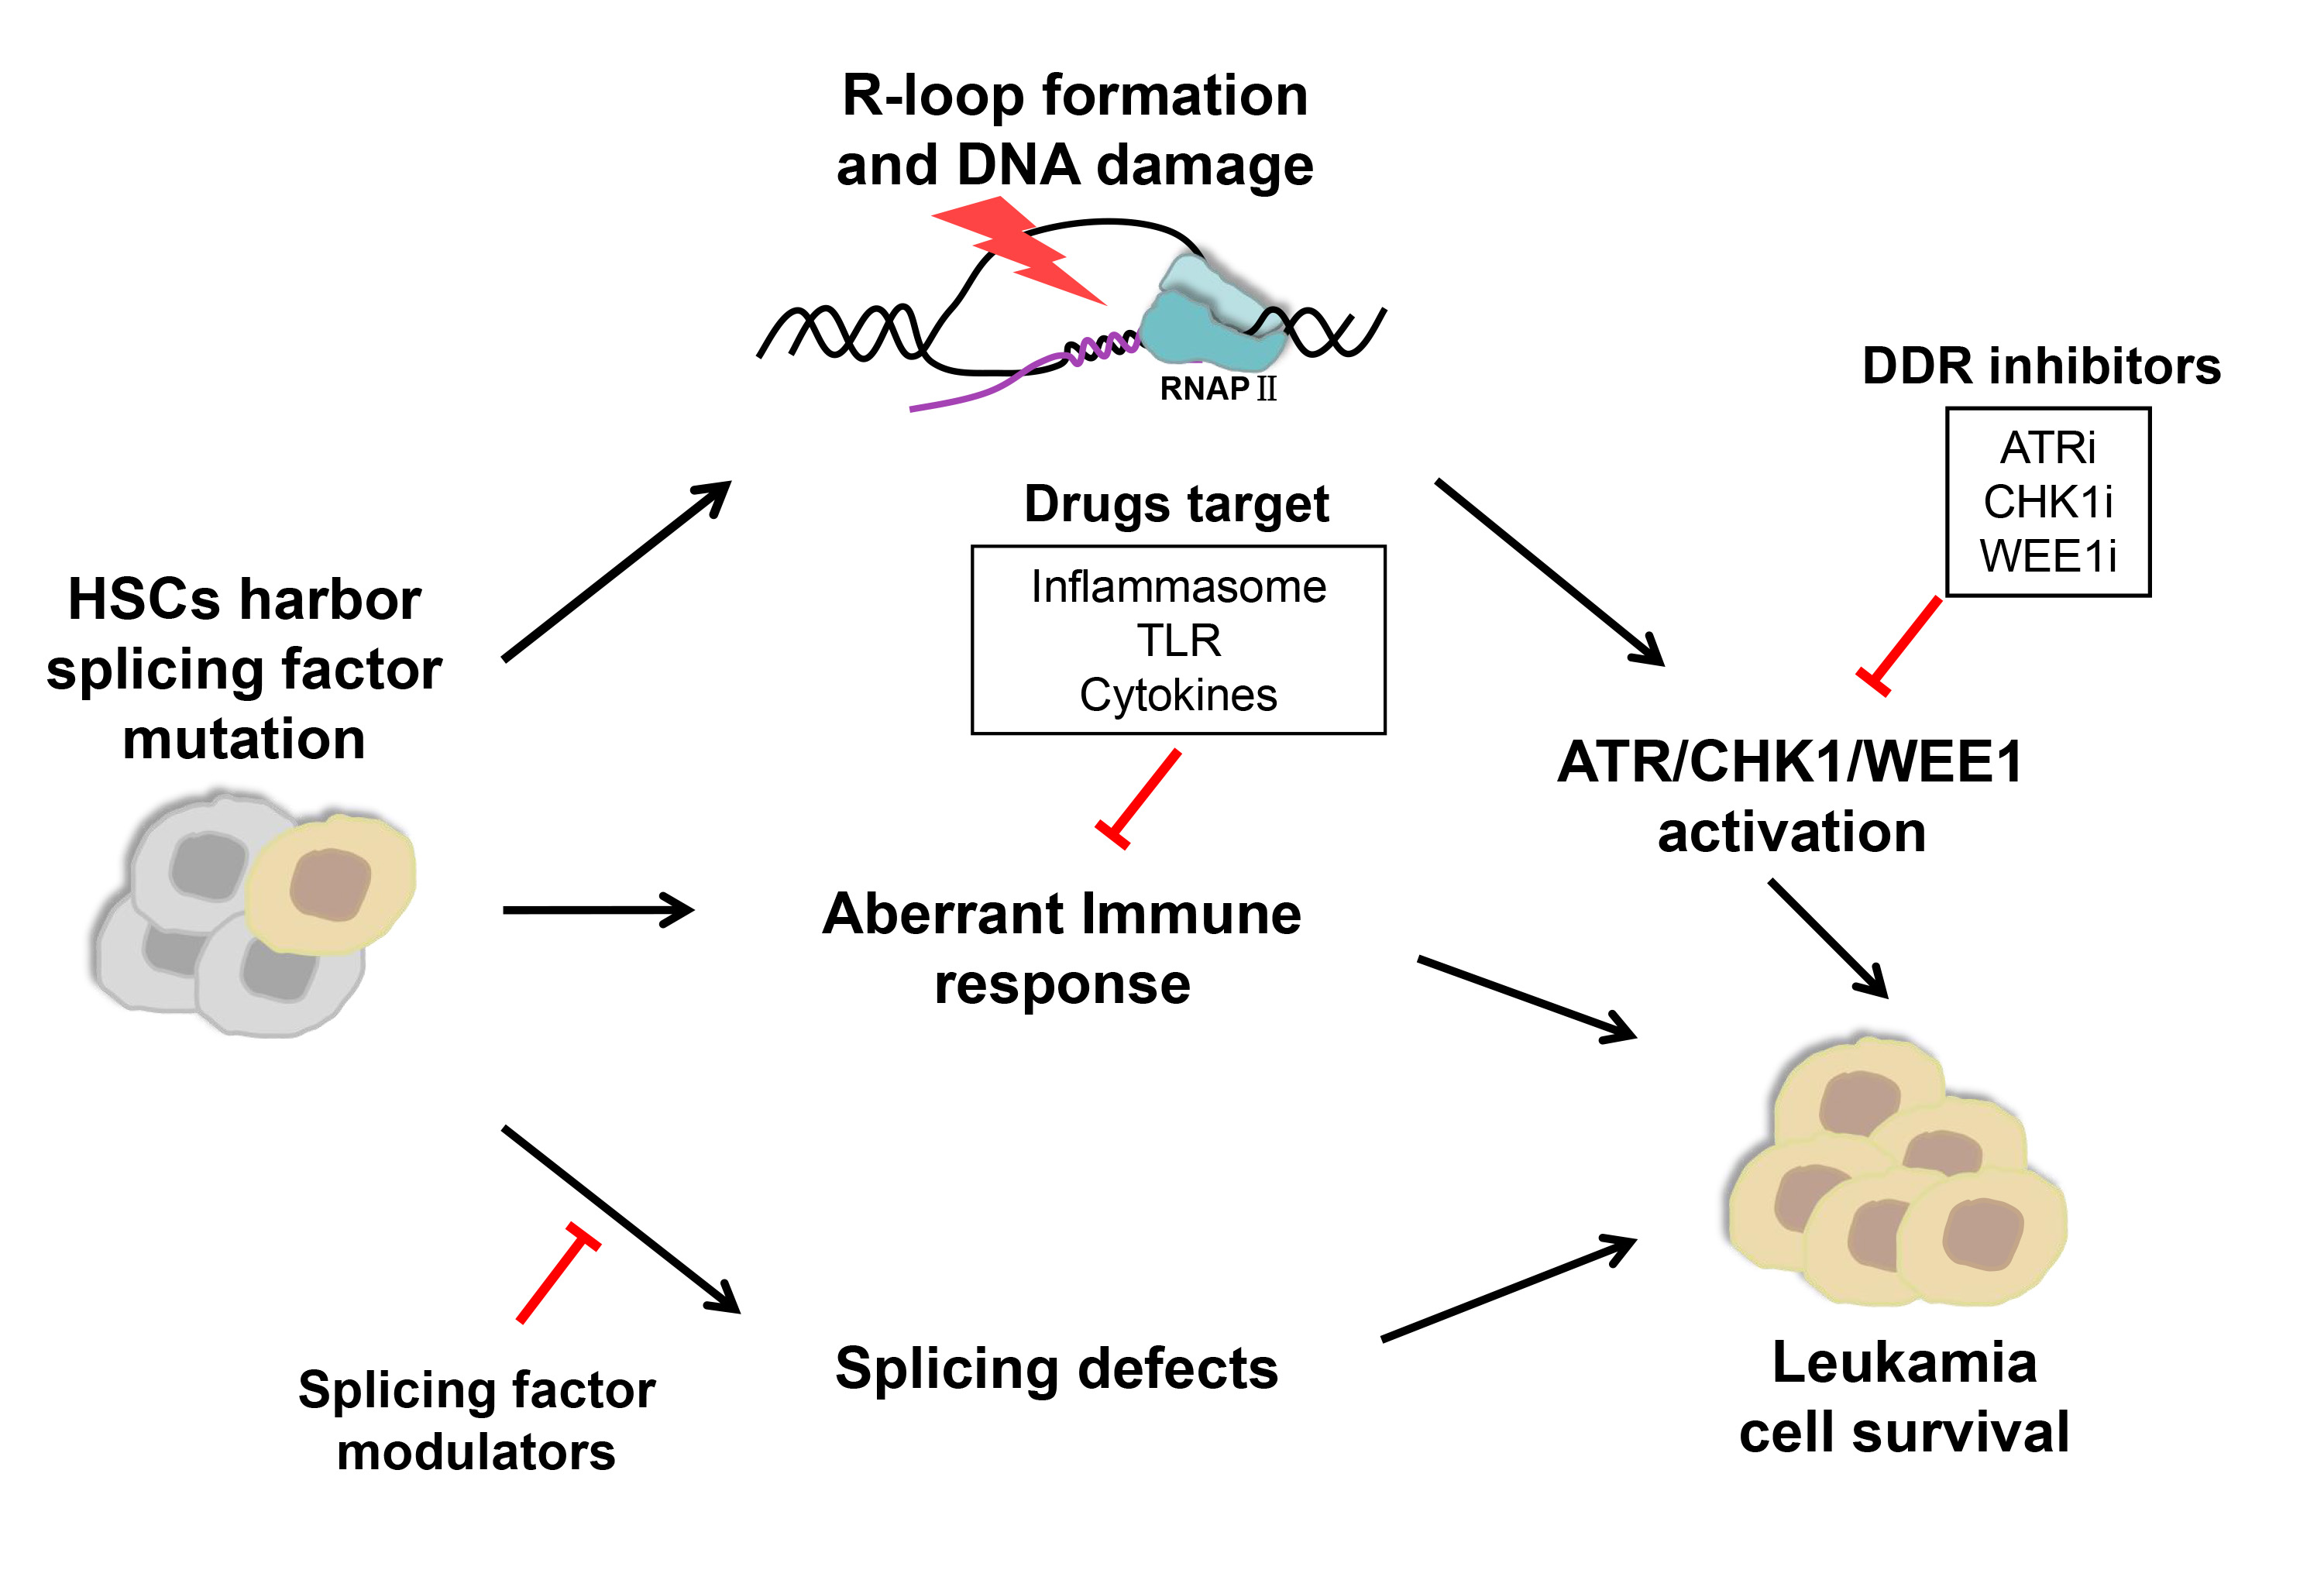 Figure 1. Approaches to targeting splicing factor mutations in splicing factor-mutant myelodys-plastic syndromes/acute myeloid leukemia. Cells harboring splicing factor mutations have increased R loops and dysregulation of innate immune and inflammatory pathways. The elevated R-loop formation results in activation of the ATR signaling pathway and DNA-damage response. Leu-kemic cells harboring splicing factor mutations preferentially respond to ATR/CHK1/WEE1 inhi-bition and immune targeting agents (Inflammasome, Cytokines). In addition, cells with splicing factor mutations are more sensitive to splicing modulators that selectively inhibit SF3B1, RBM39, and arginine methyltransferase (PRMT) activity.